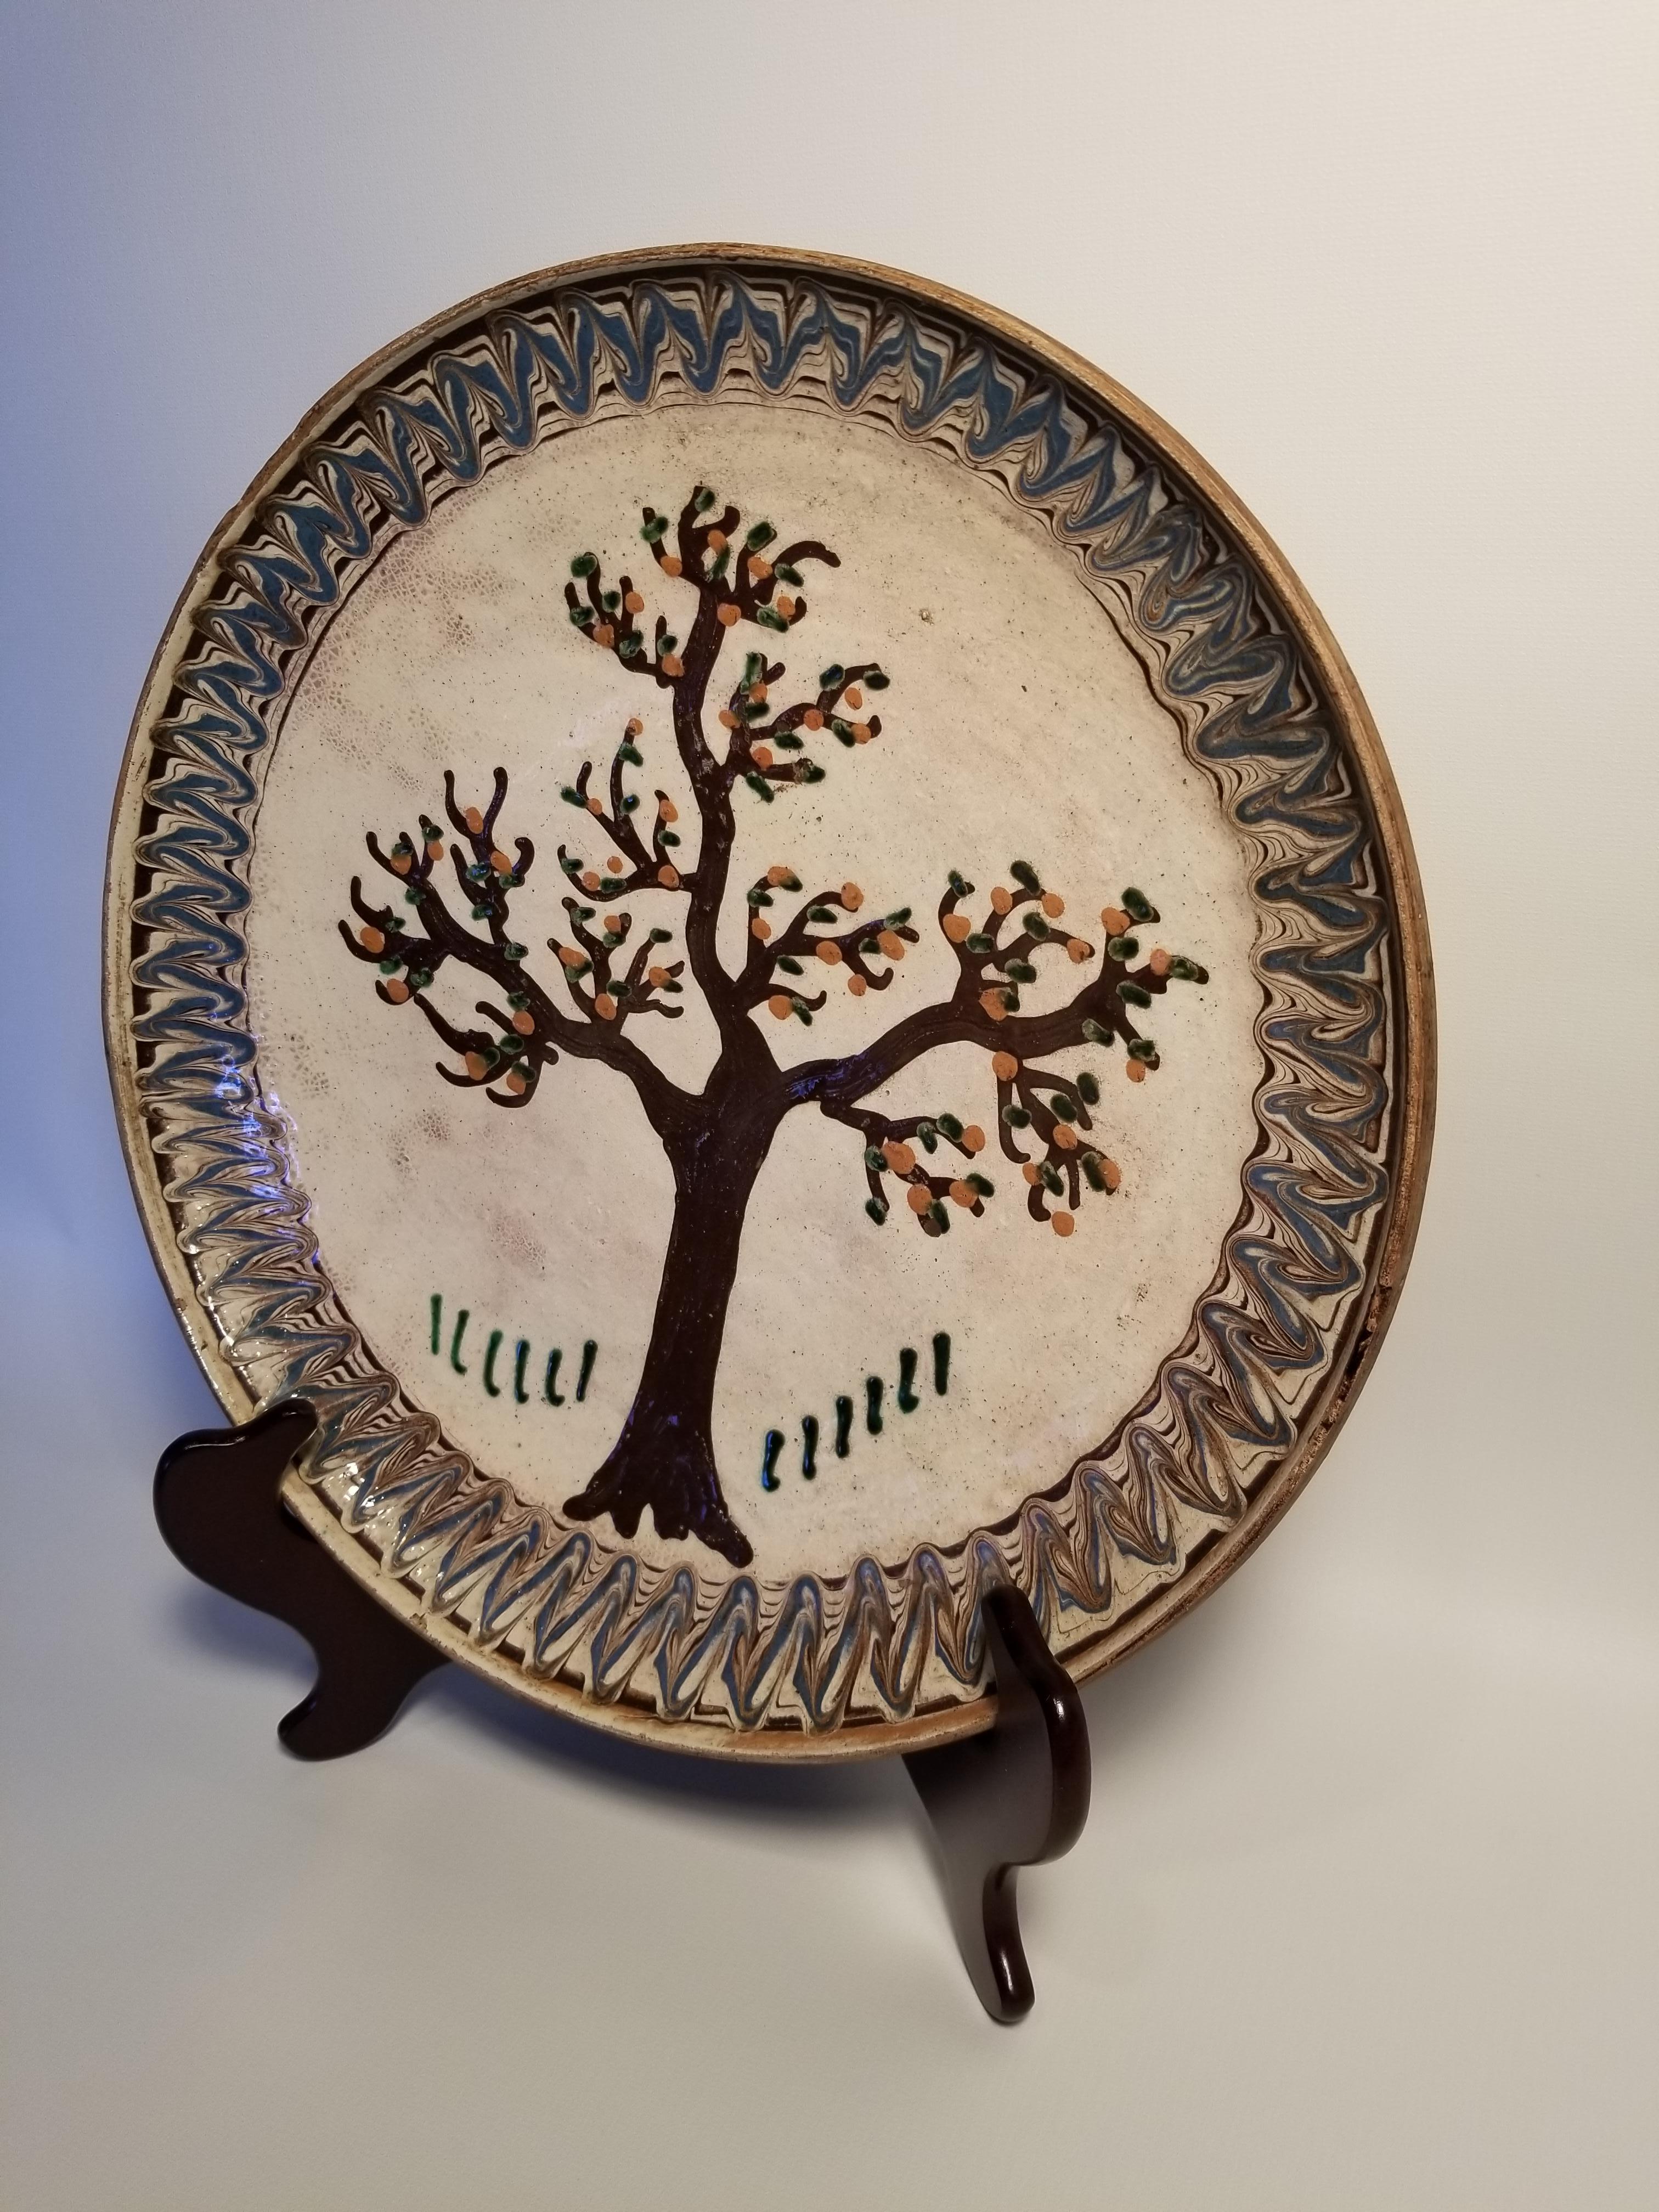 Charming folk art plate with a painted tree, American, early 20th century.